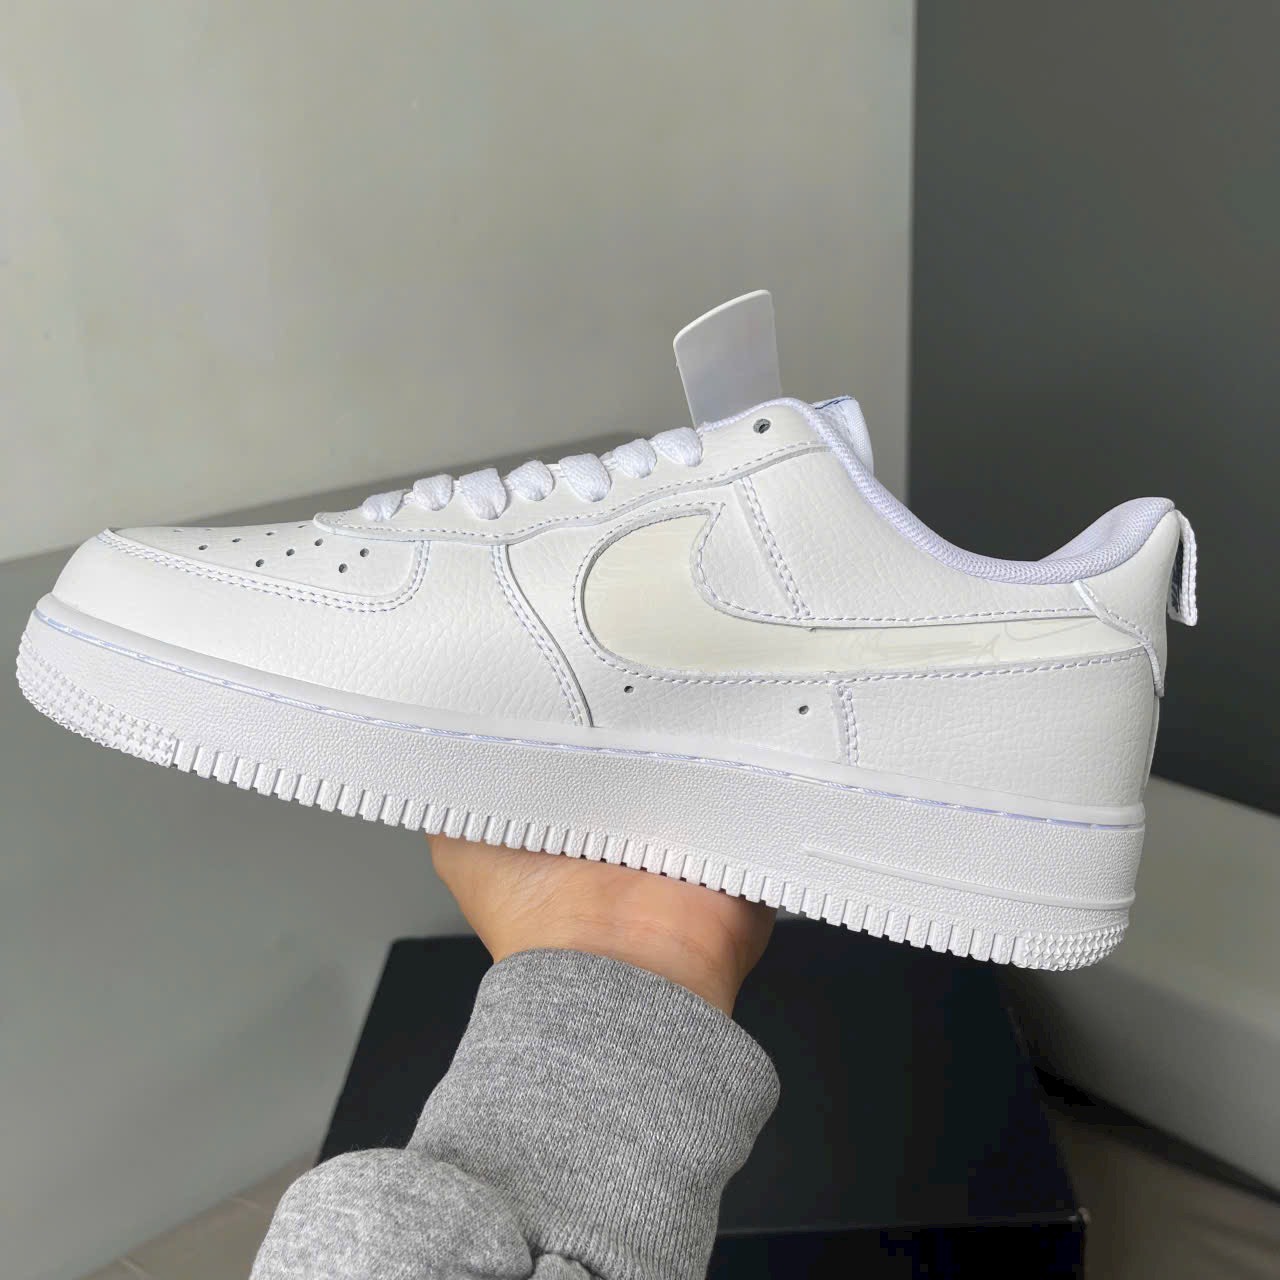 Giày Nike Air Force 1 Low Reflective Swoosh White Blue Best Quality